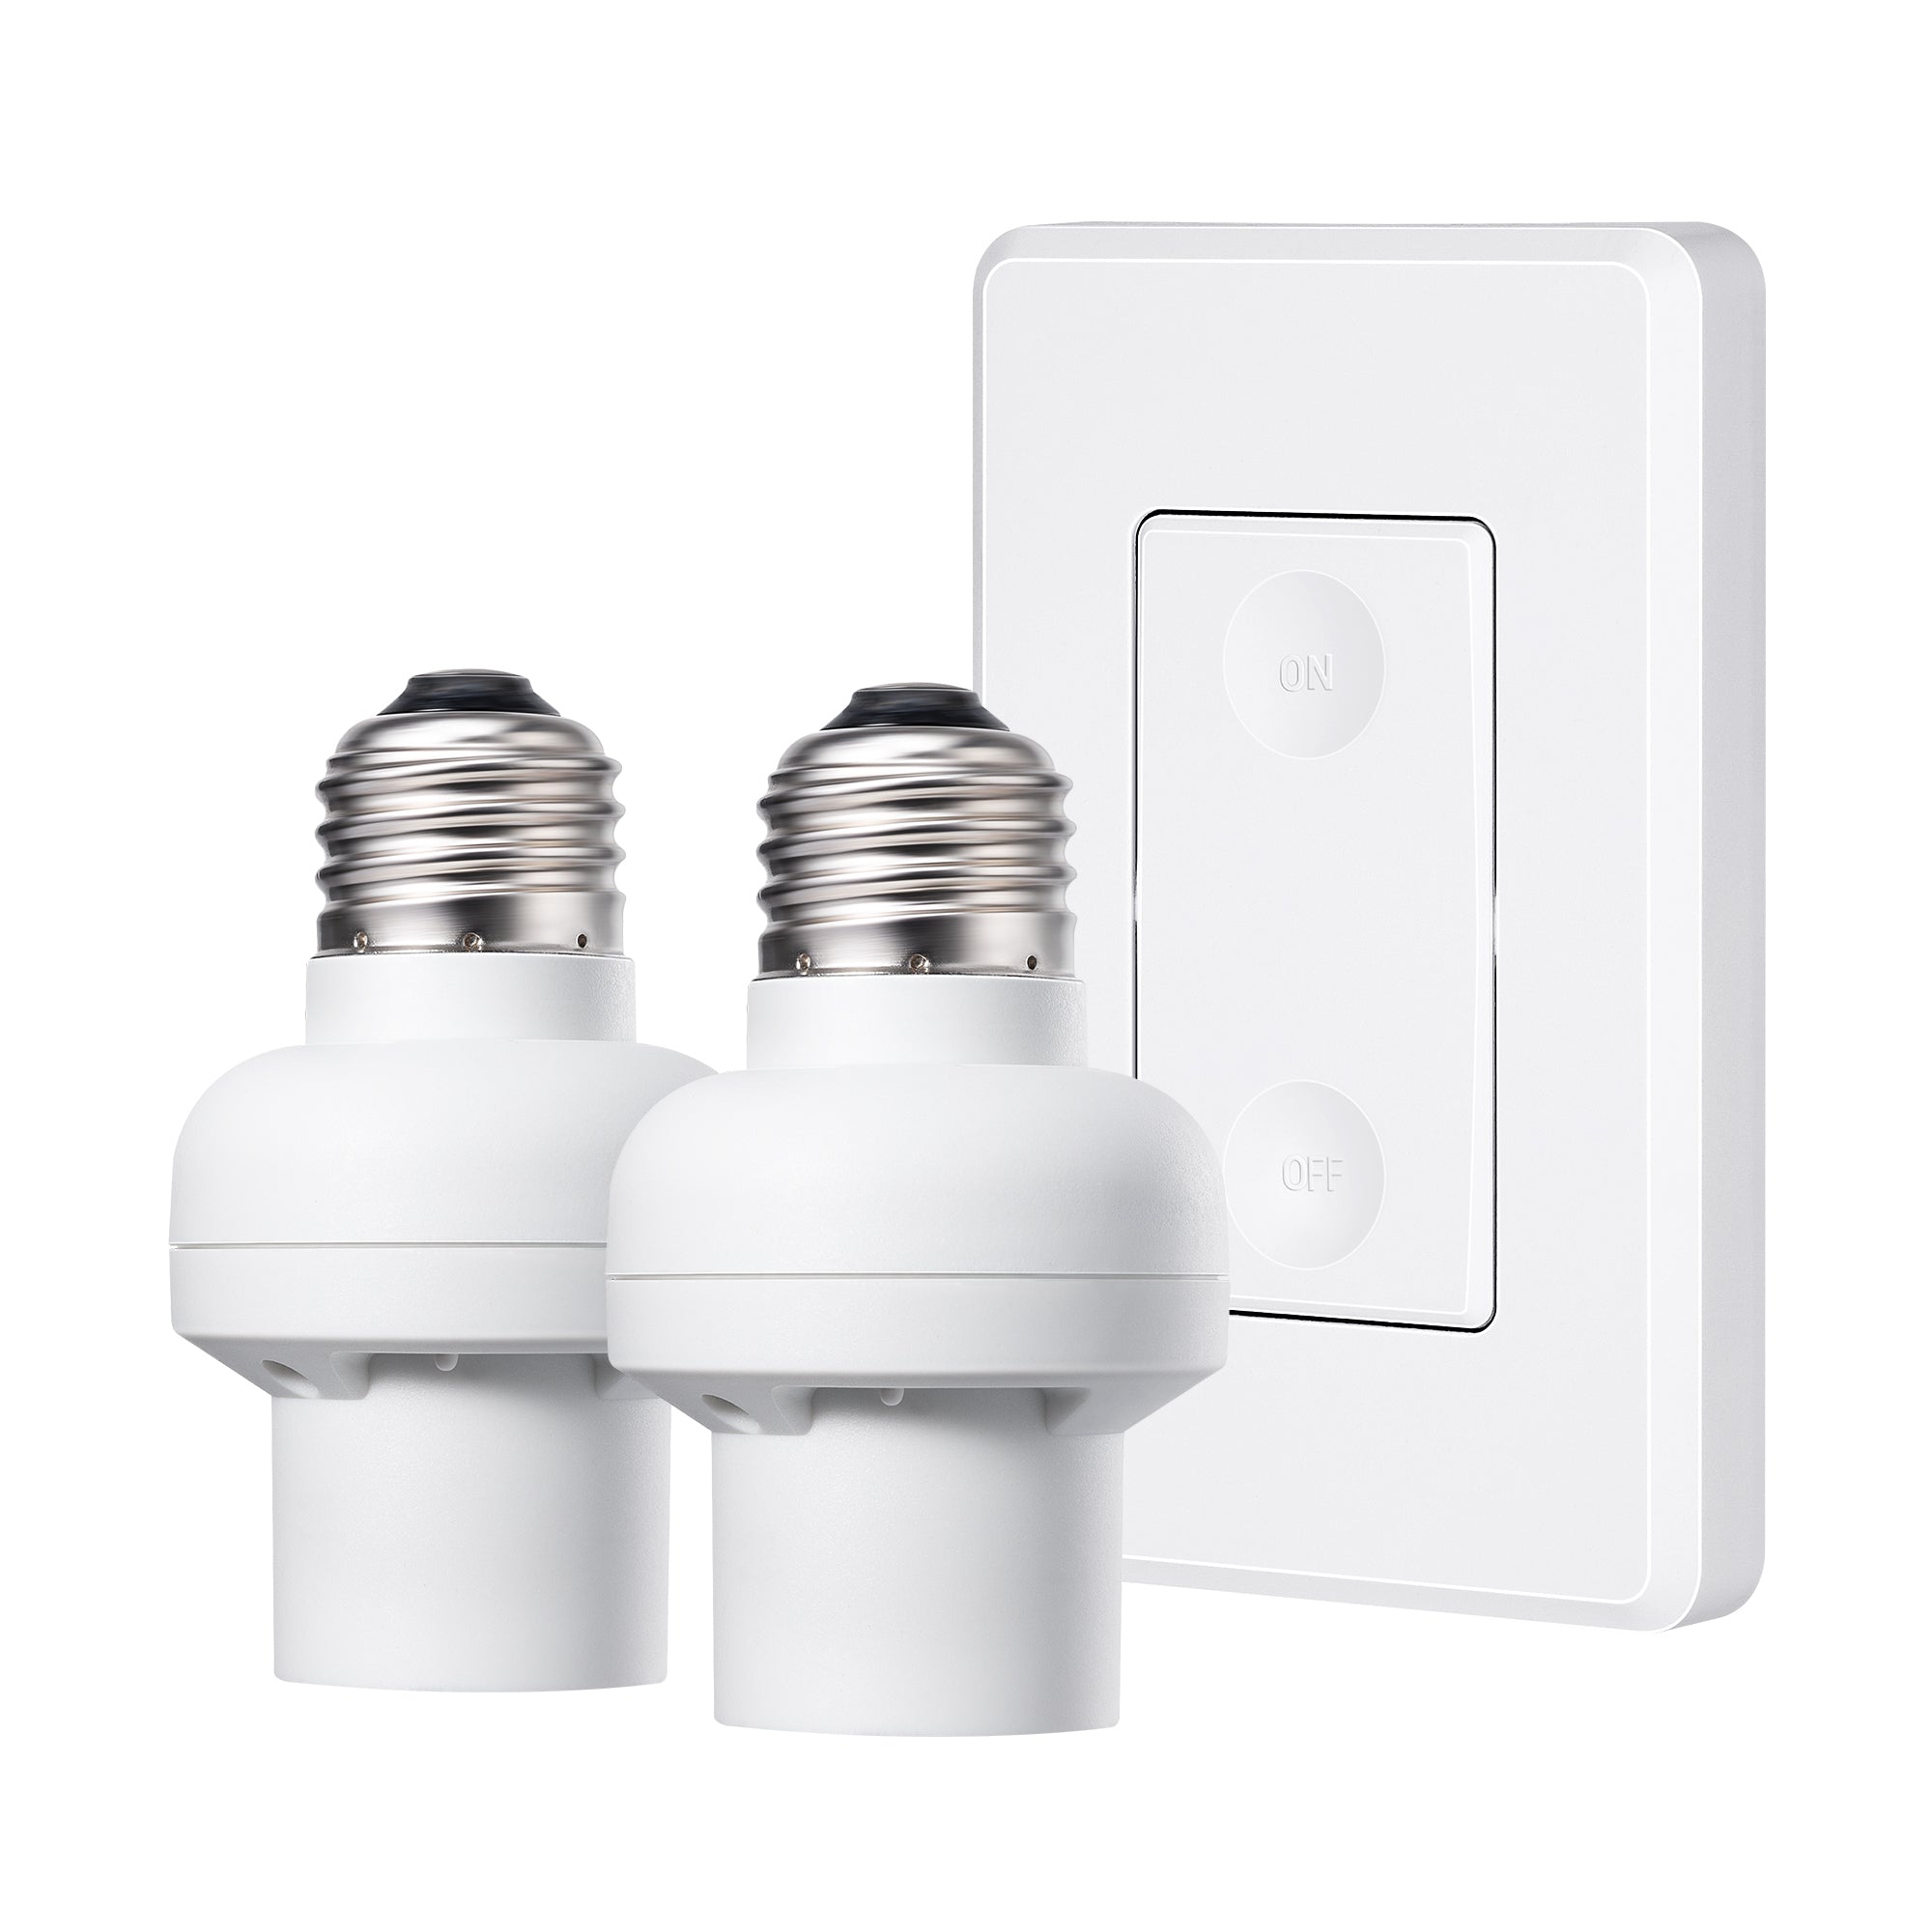 Dewenwils Remote Control Outlet Wireless Wall Mounted Light Switch